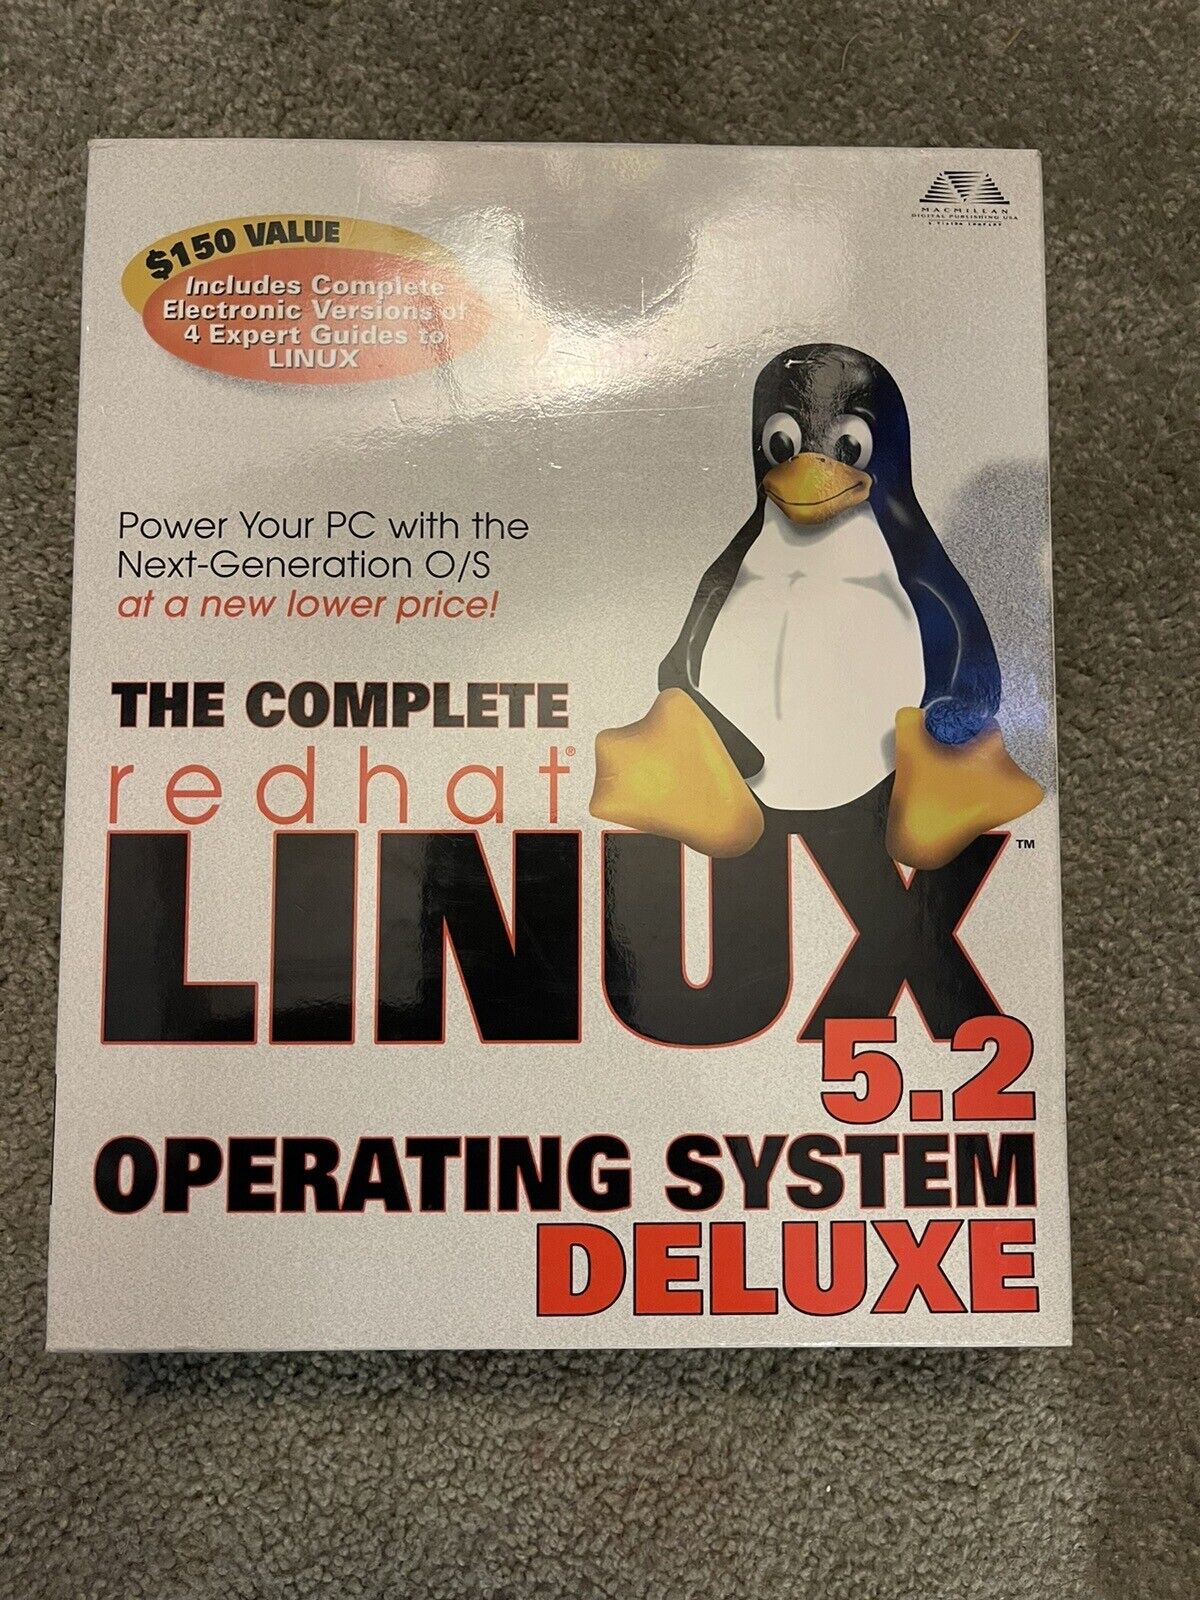 Complete Redhat Linux 5.2 Operating System Deluxe 90s Rare Open Box. Never Used